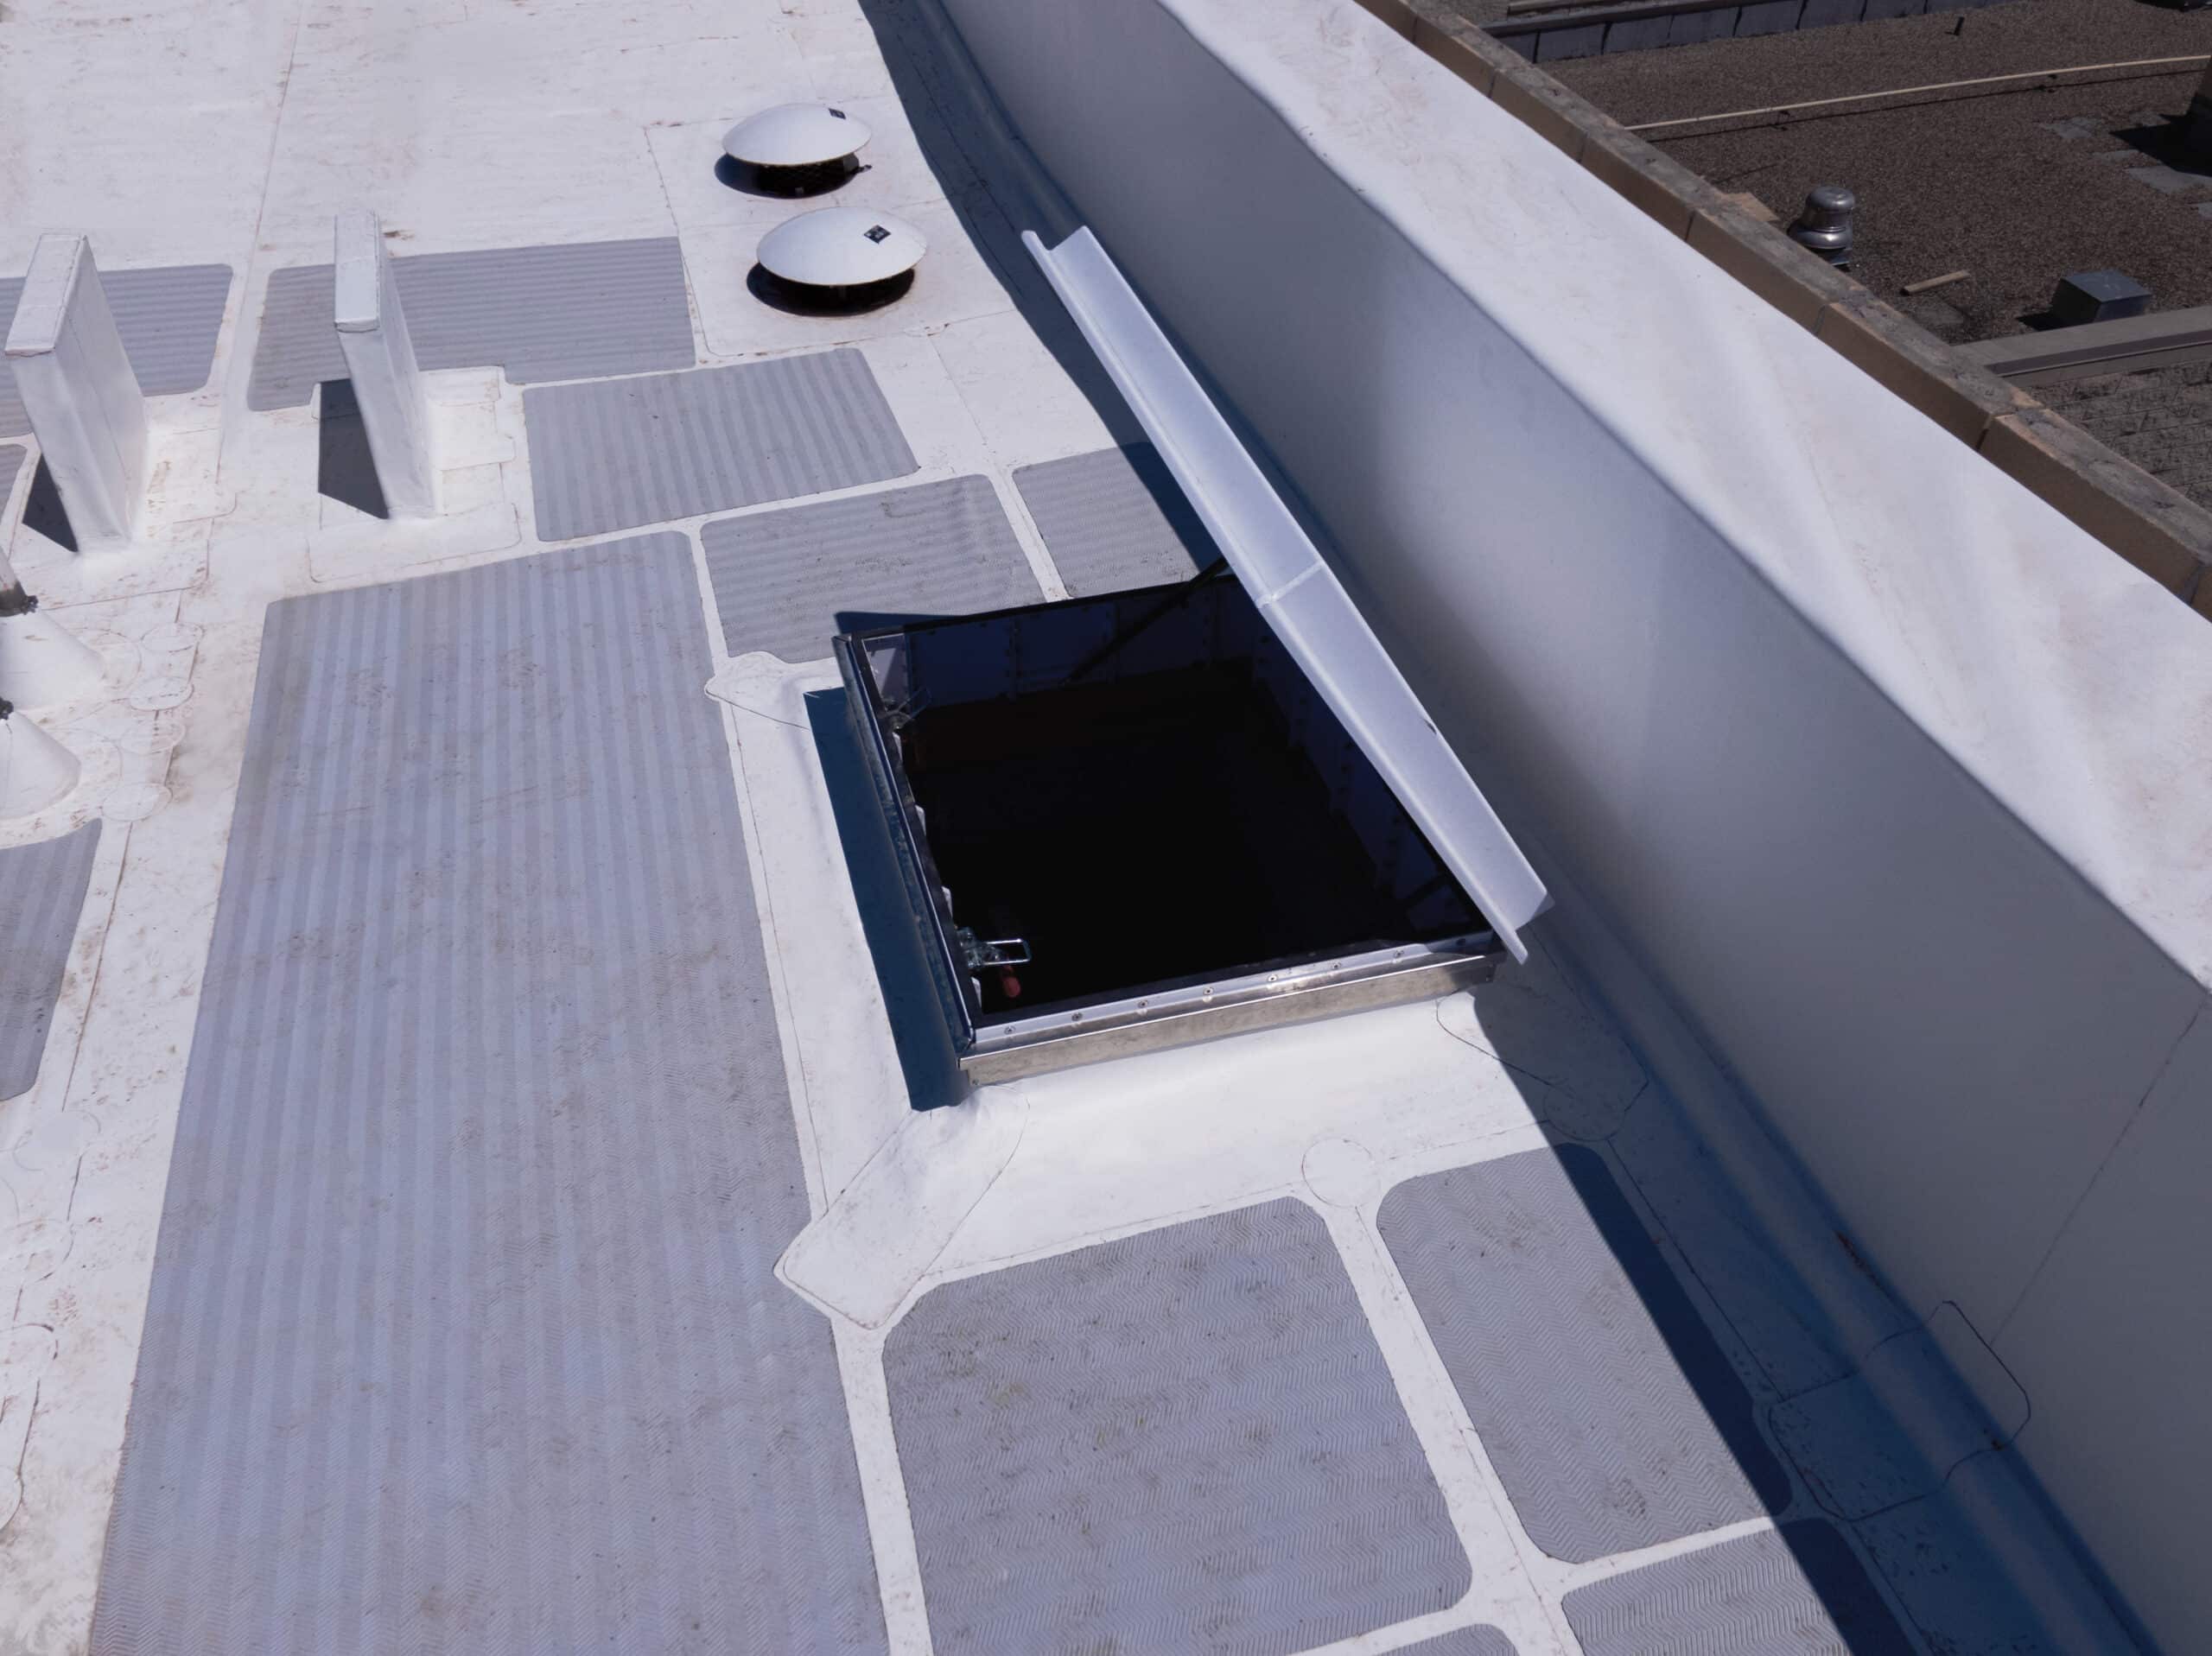 CYCLONE Roof Drains and Roof Hatch